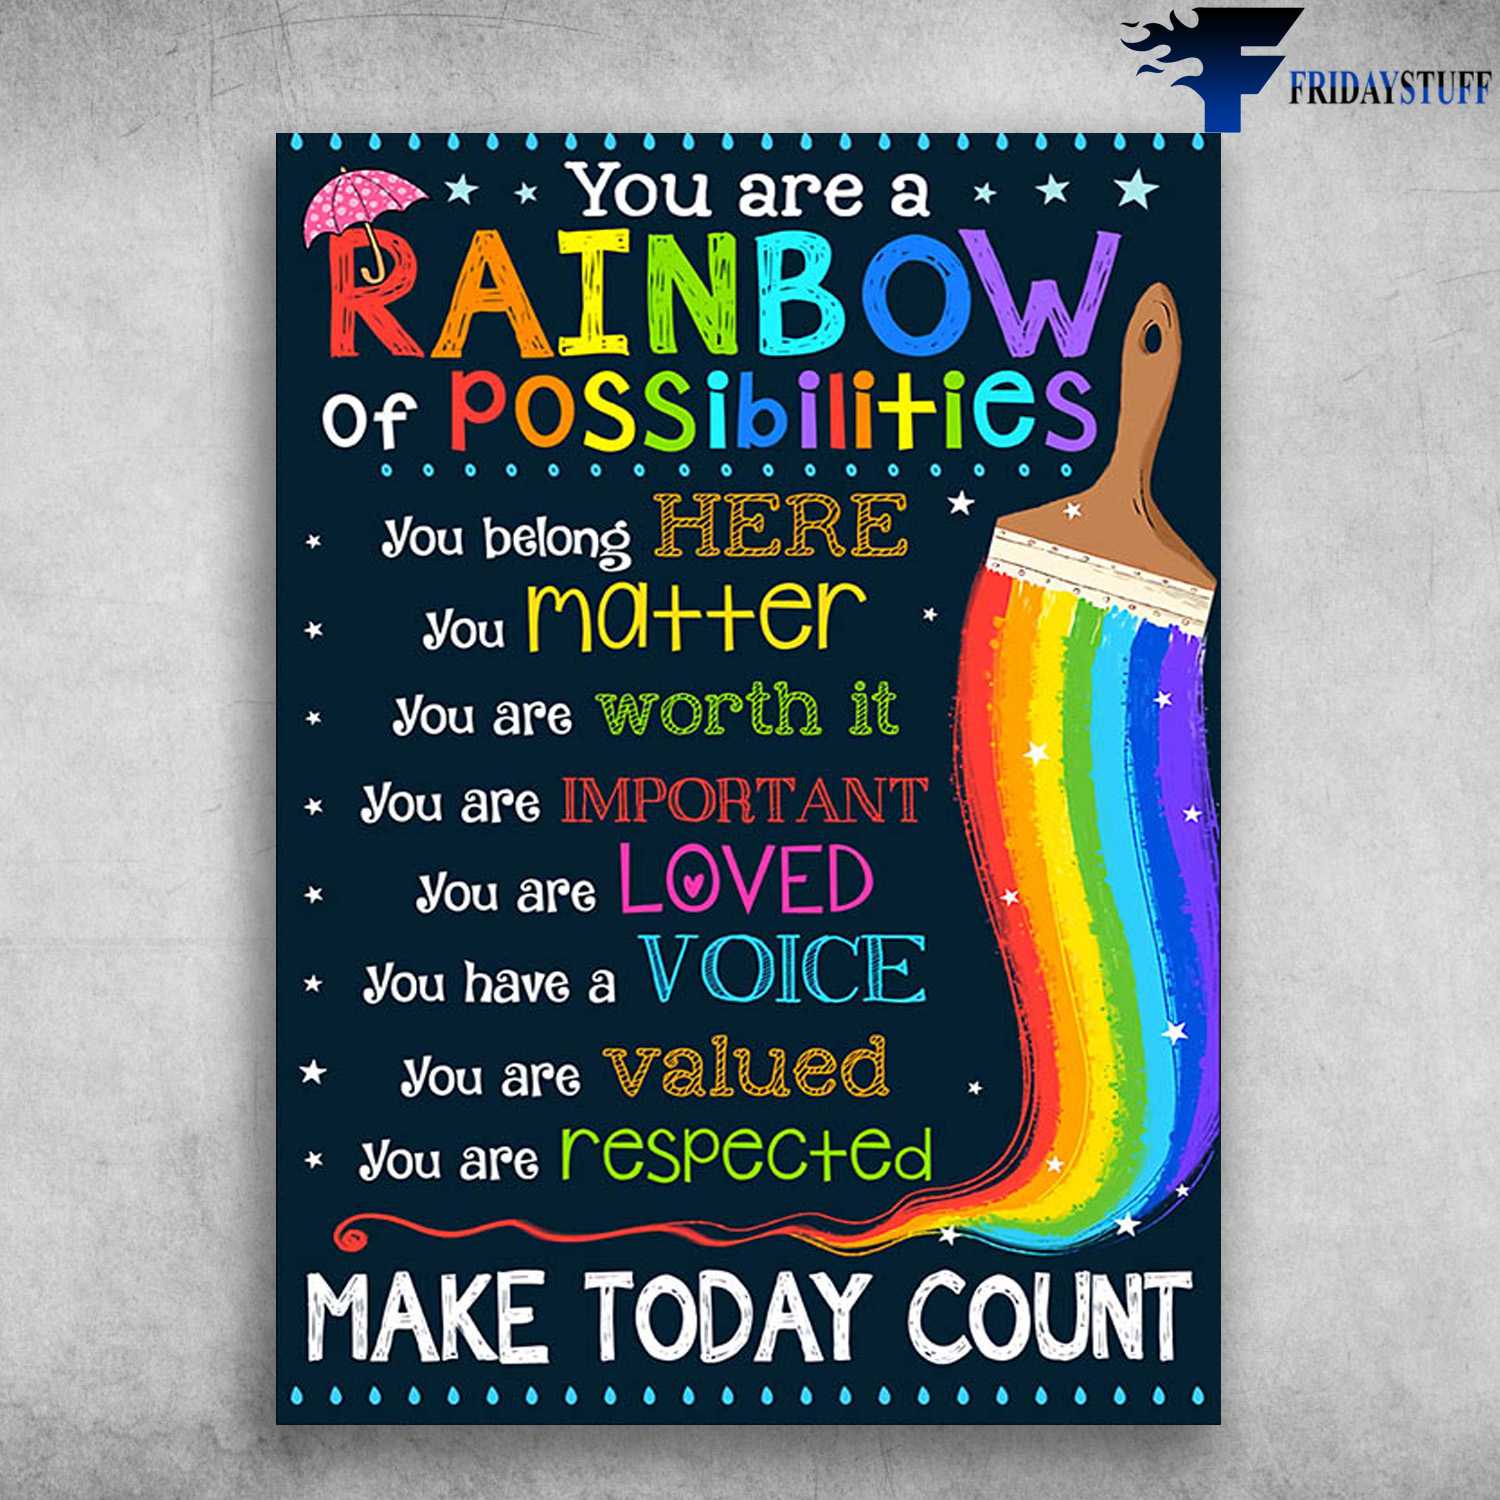 Social Worker - You Are Rainbow, Of Possibilities, You Beling Here, You Matter, You Are Worth It, You Are Important, You Are Loved, You Have A Voice, Make Today Count